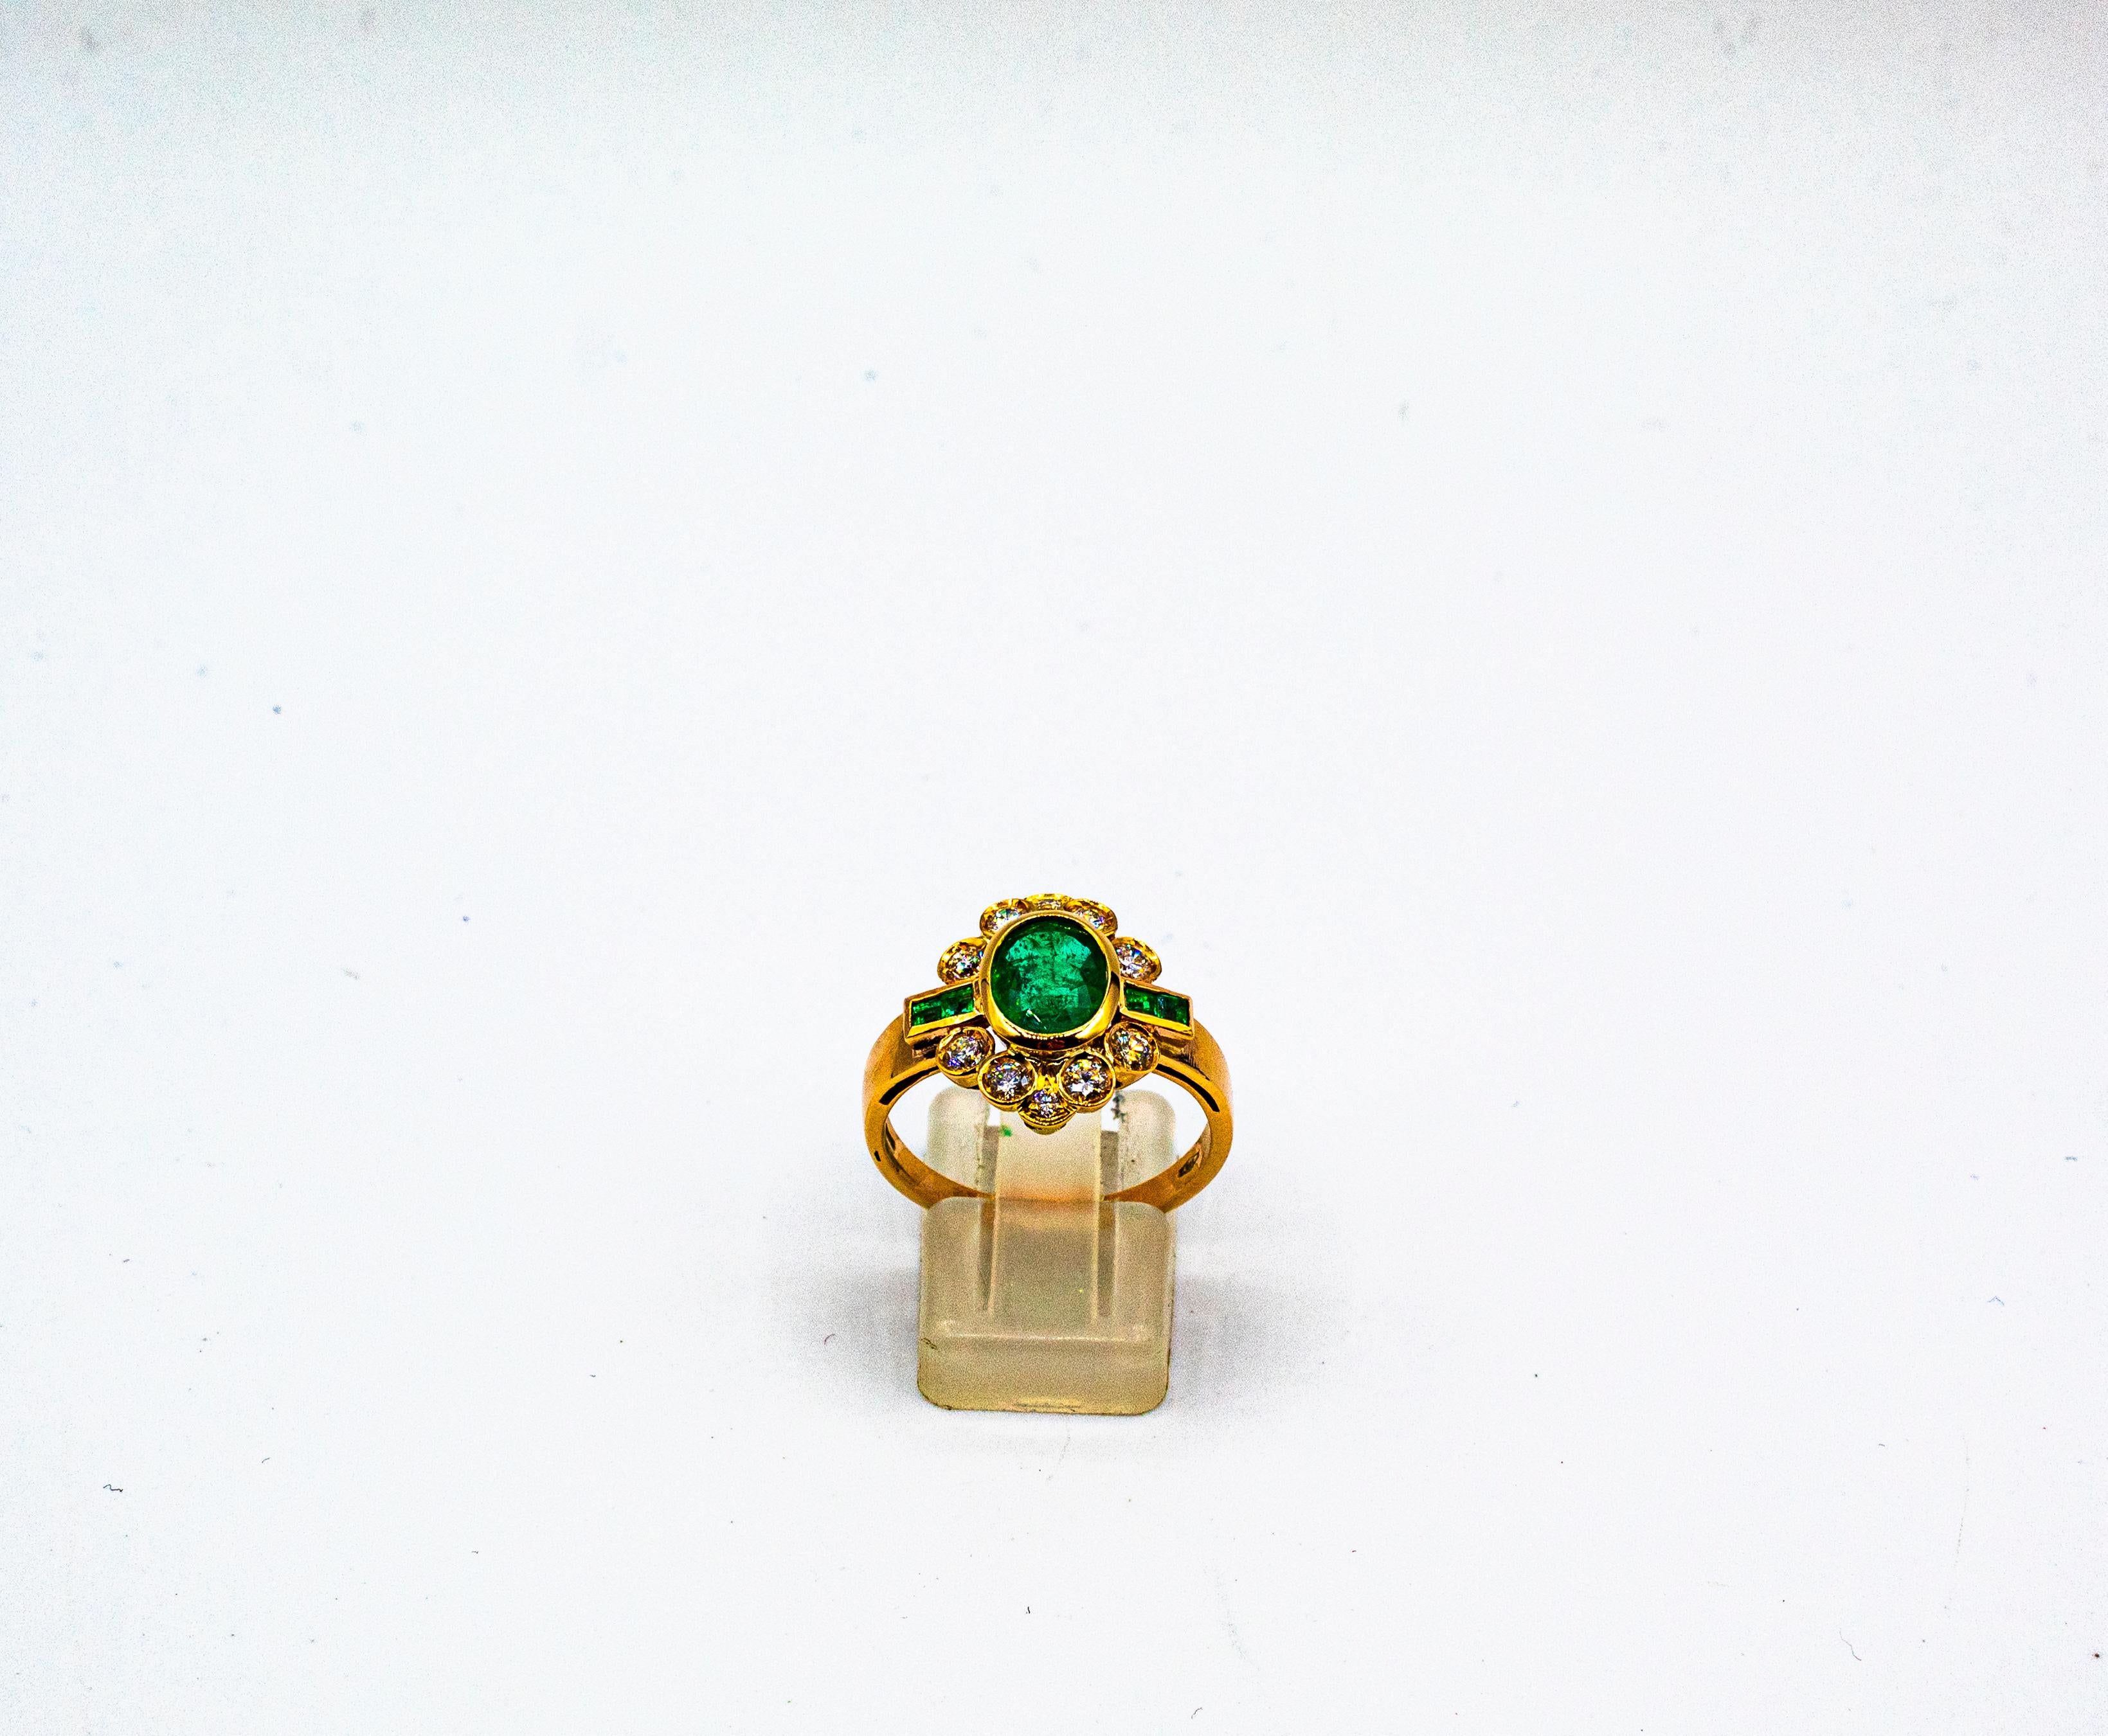 This Ring is made of 9K Yellow Gold.
This Ring has 0.55 Carats of White Brilliant Cut Diamonds.
This Ring has a 1.35 Carats Natural Zambia Oval Cut Emerald.
This Ring has 0.20 Carats Carré Cut Emeralds.
This Ring is inspired by Art Deco.

Size ITA: